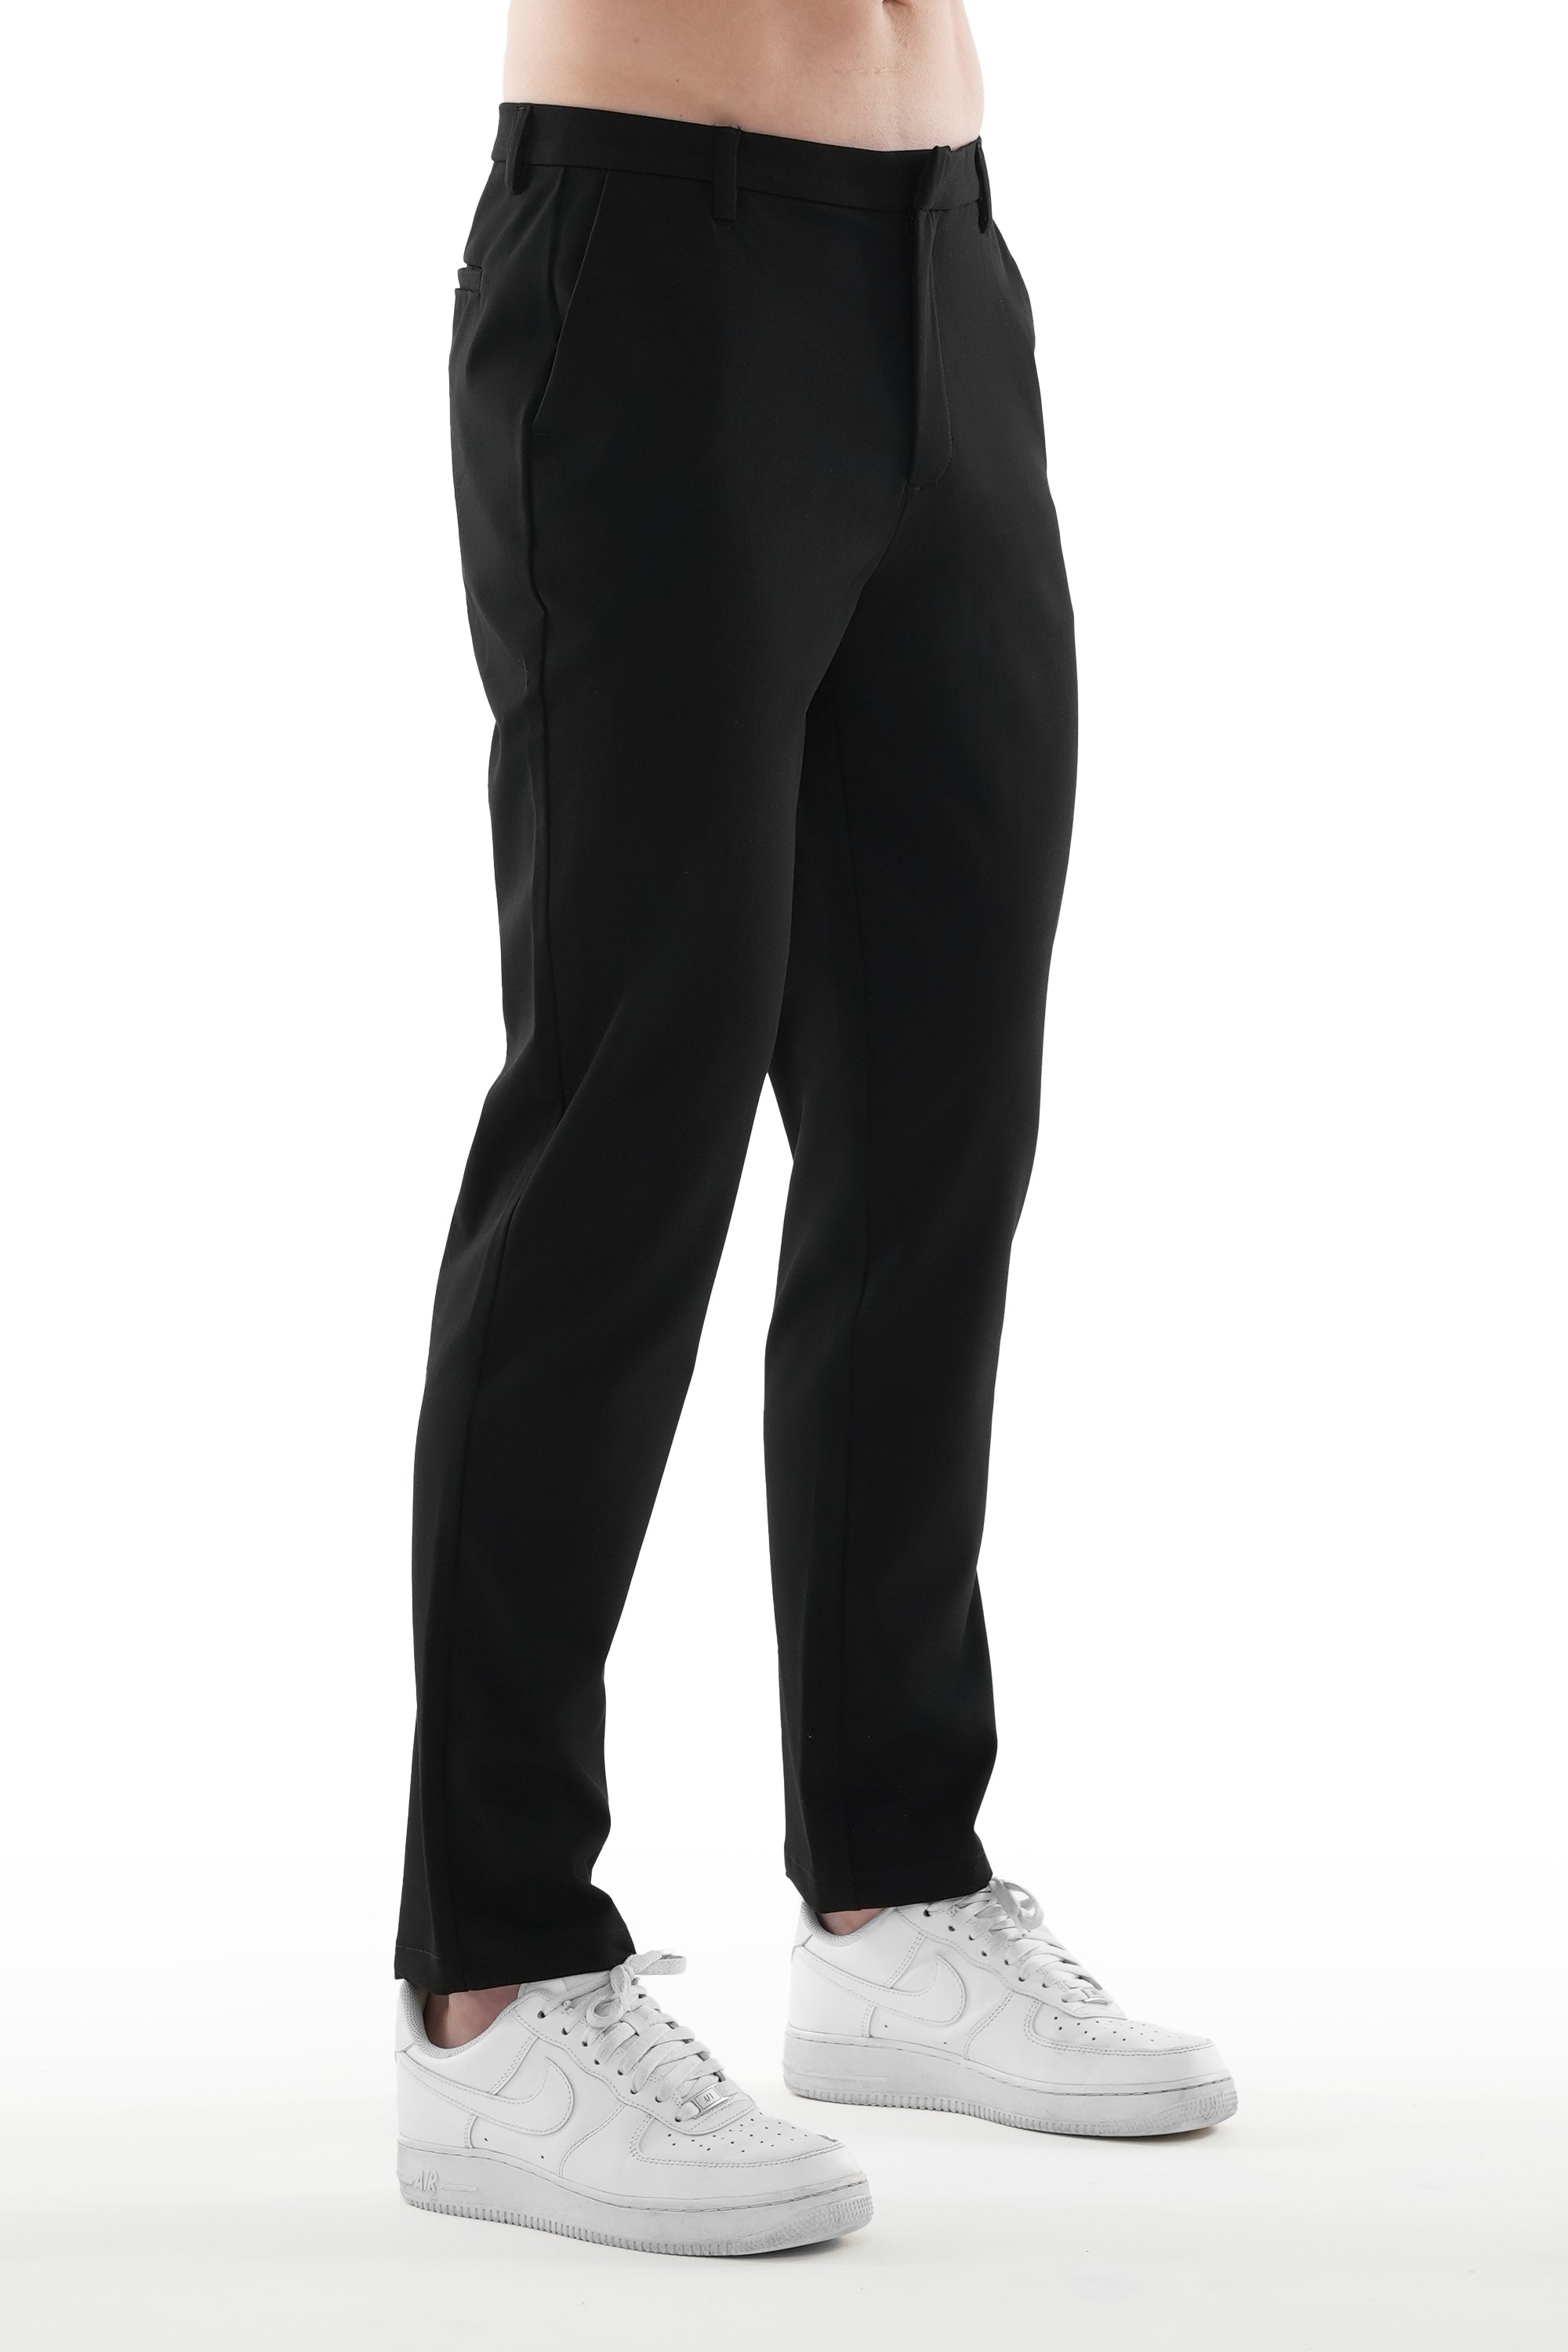 THE LUCIA TROUSERS - BLACK - ICON. AMSTERDAM